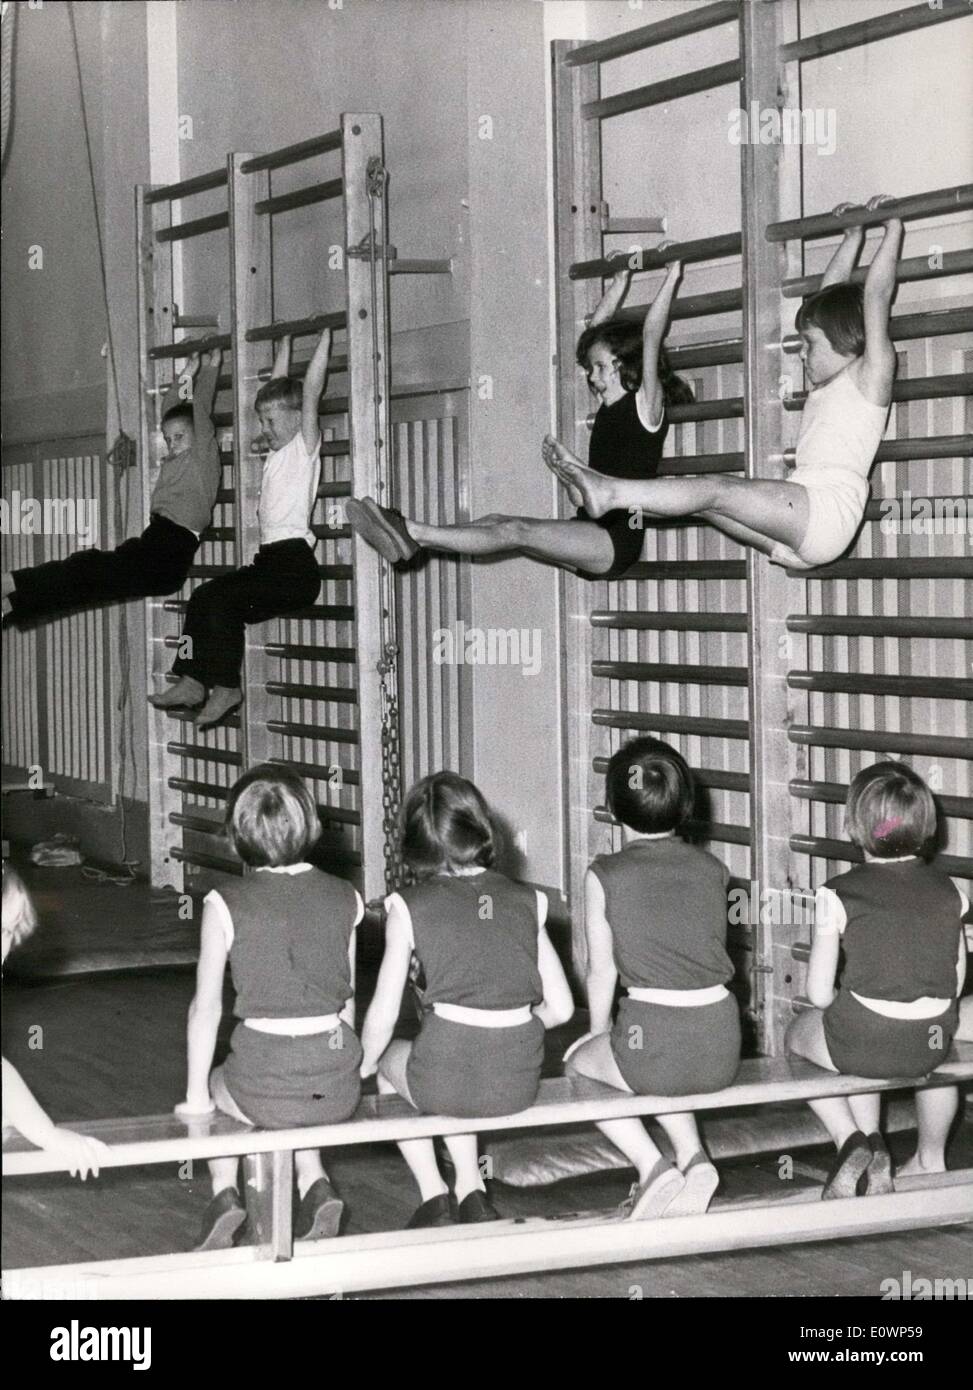 Oct. 31, 1963 - These children are students of 19 Oberschule in Berlin's Leninallee. They are playing in a gymnasium that was newly built for them. Stock Photo